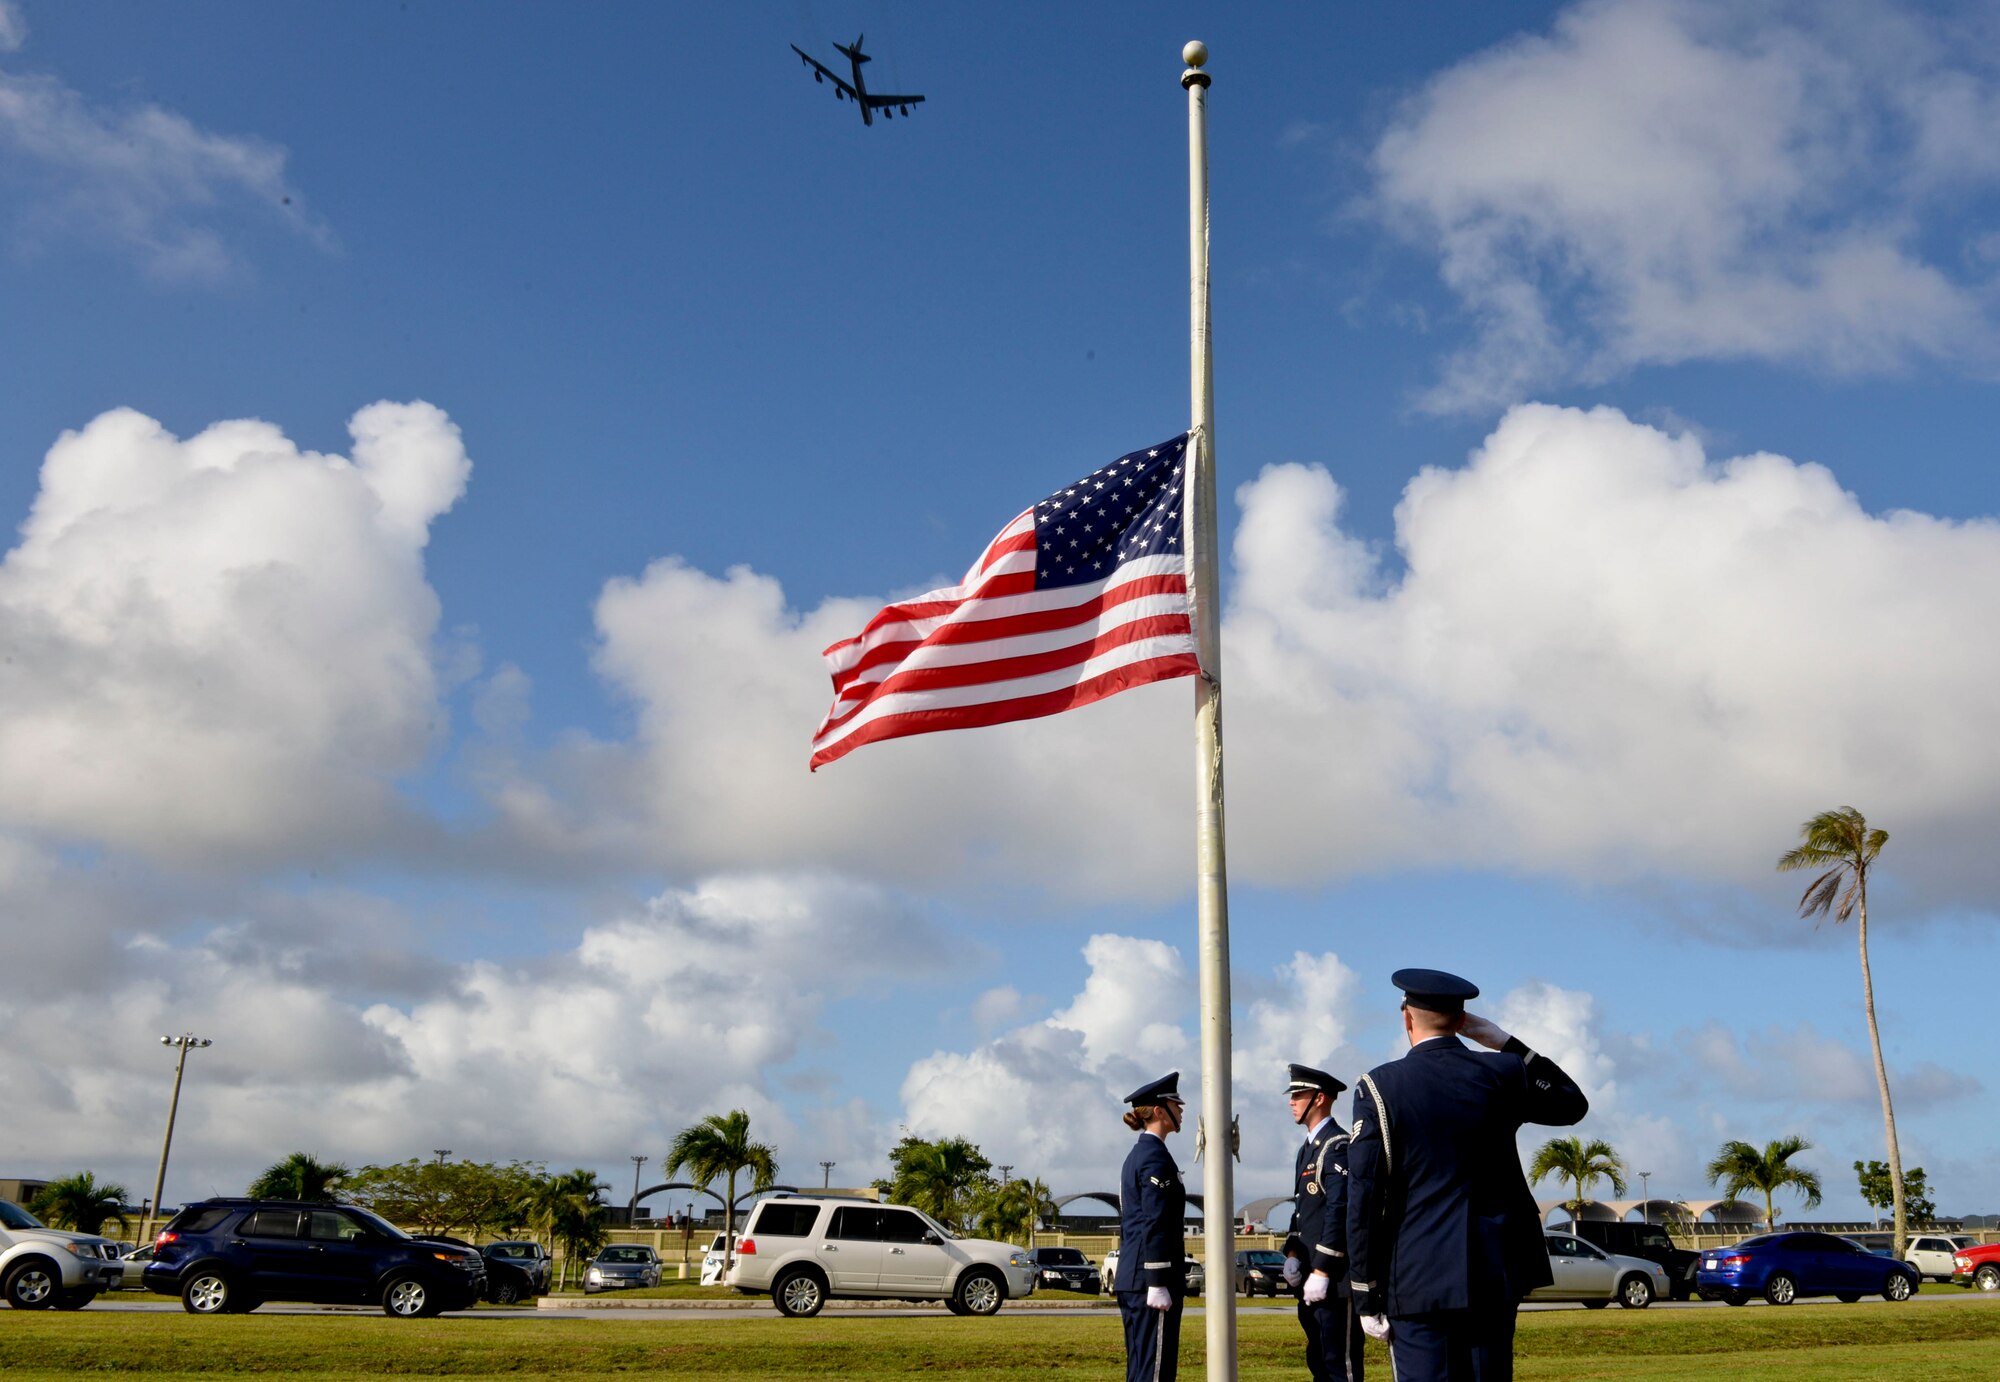 The Andersen Air Force Base Honor Guard lowers the flag to half-staff during the Operation Linebacker II Remembrance Ceremony Dec. 18, 2014, at Andersen AFB, Guam. The ceremony commemorated the 75 Airmen that lost their lives during the operation including 33 who were lost from 15 downed B-52 Stratofortress bombers. (U.S. Air Force photo by Staff Sgt. Robert Hicks/Released)  